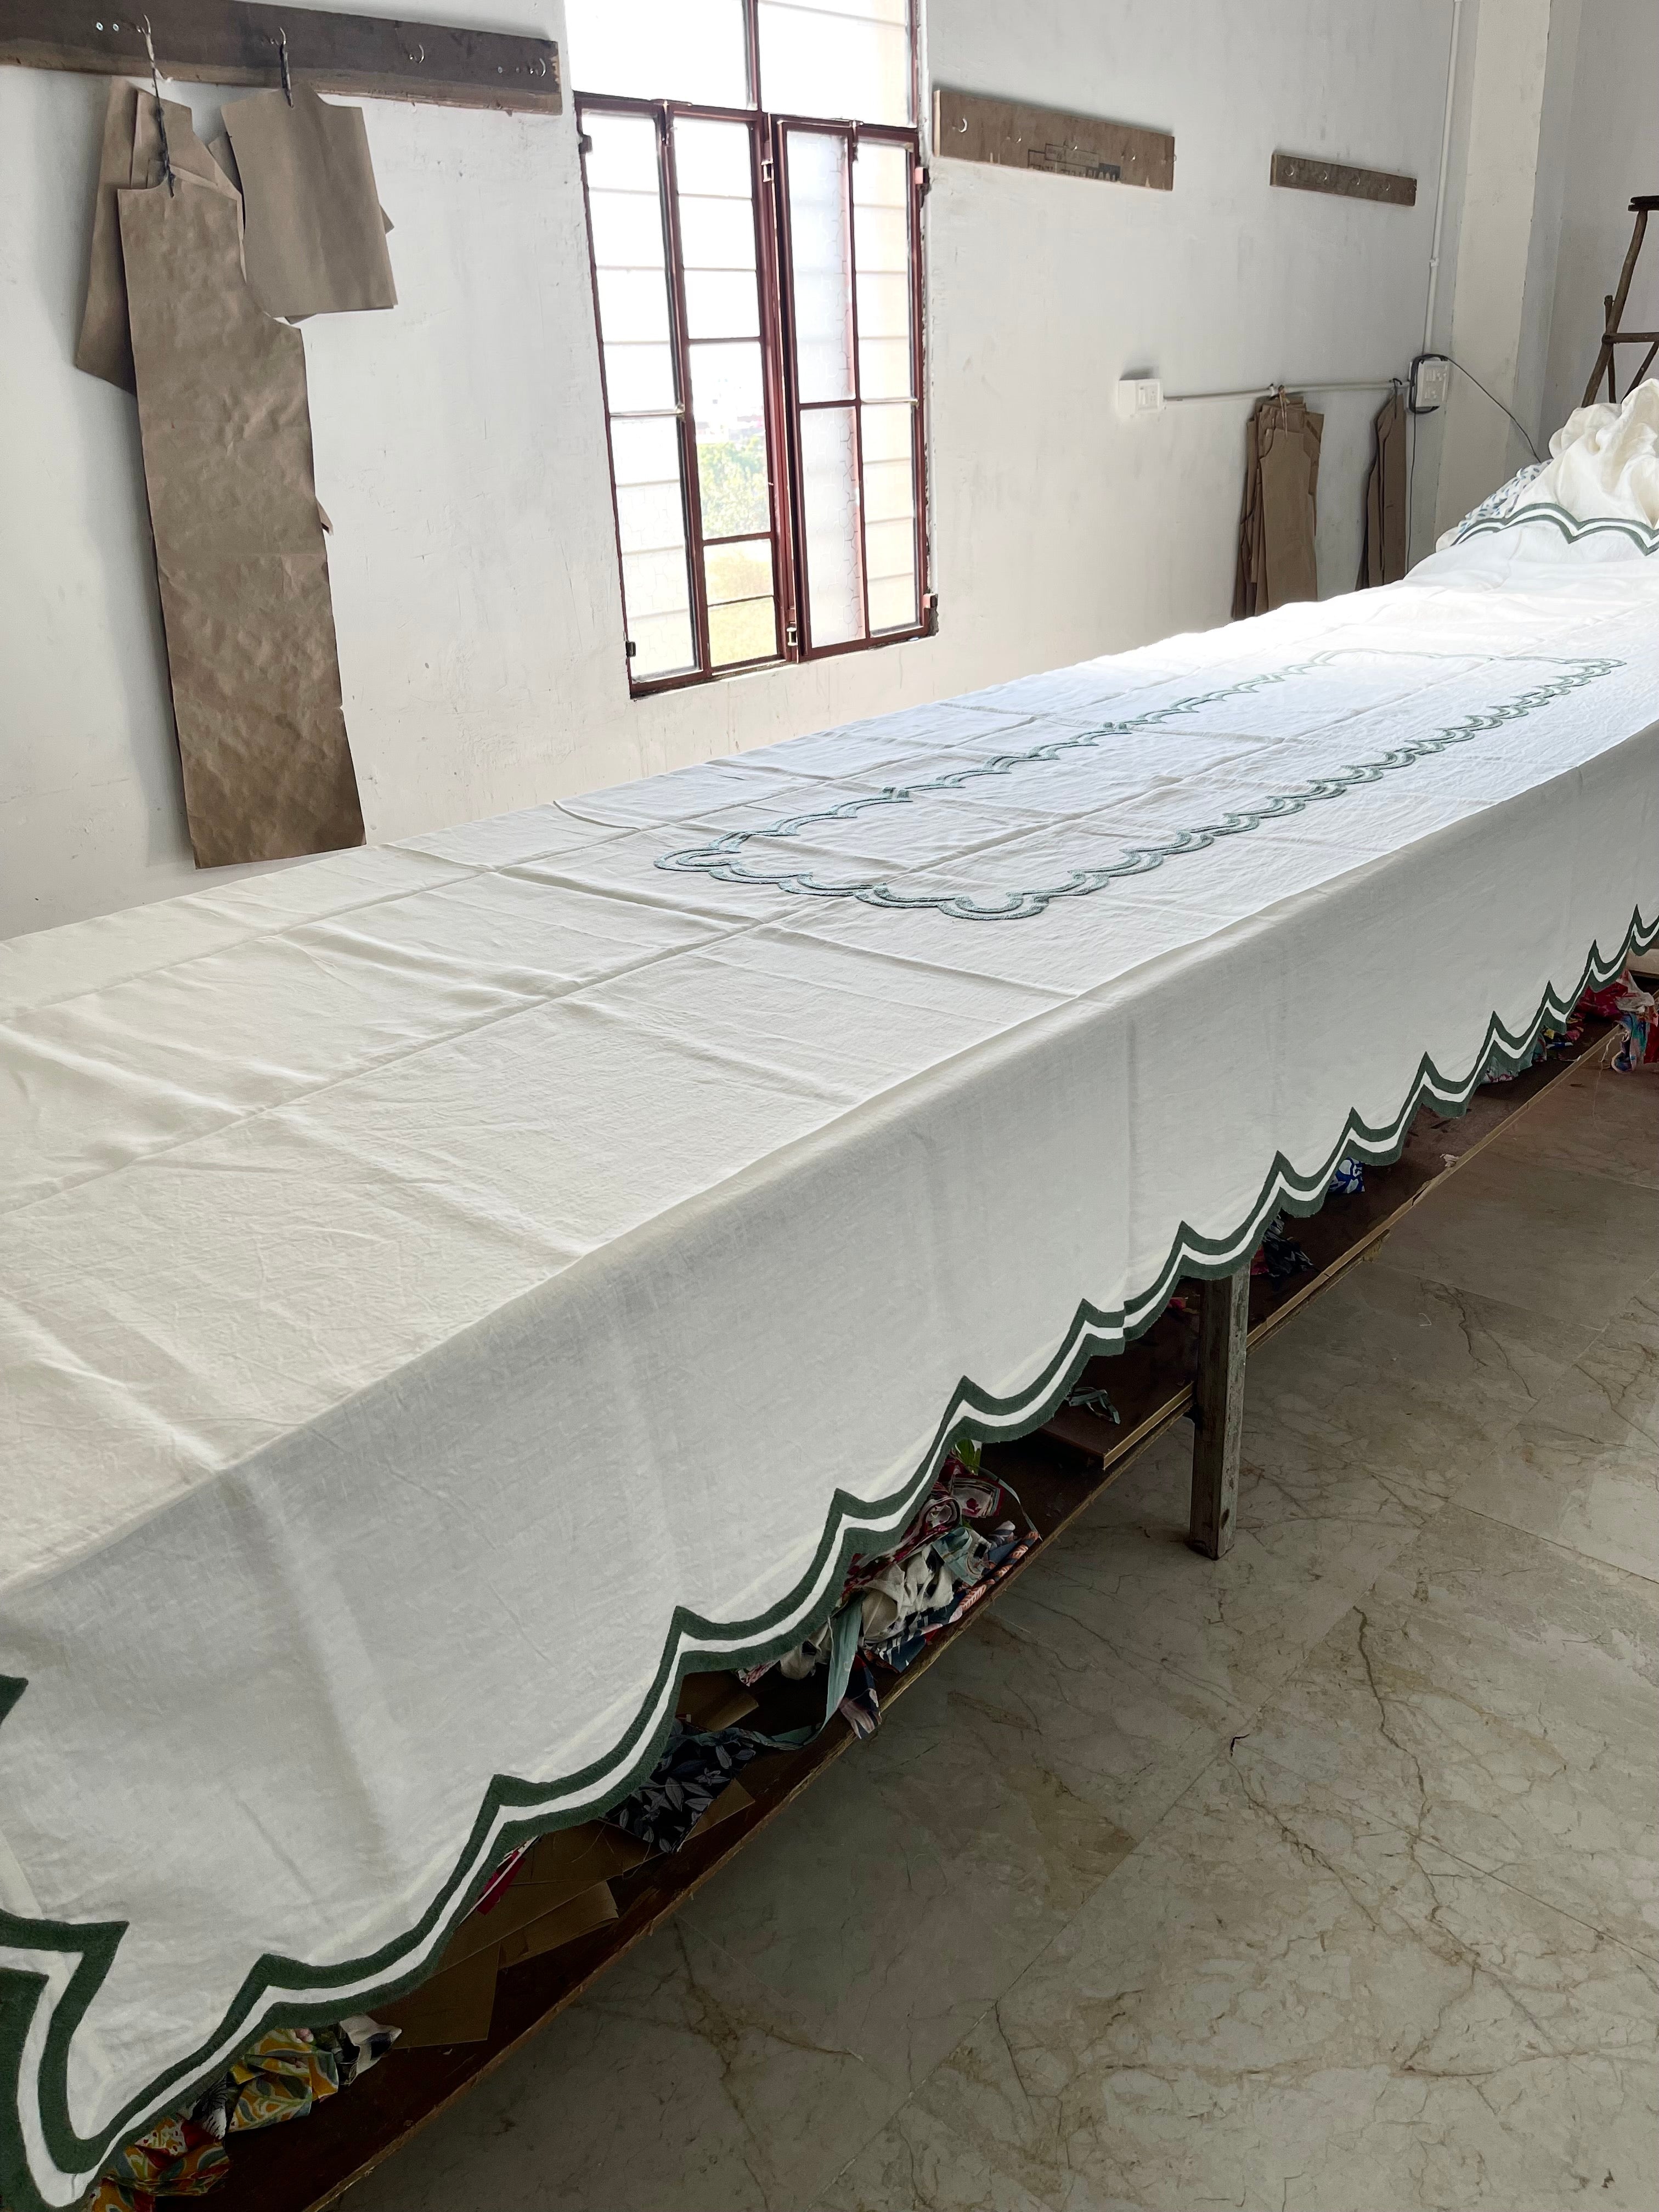 5m Scallop Tablecloth - Olive